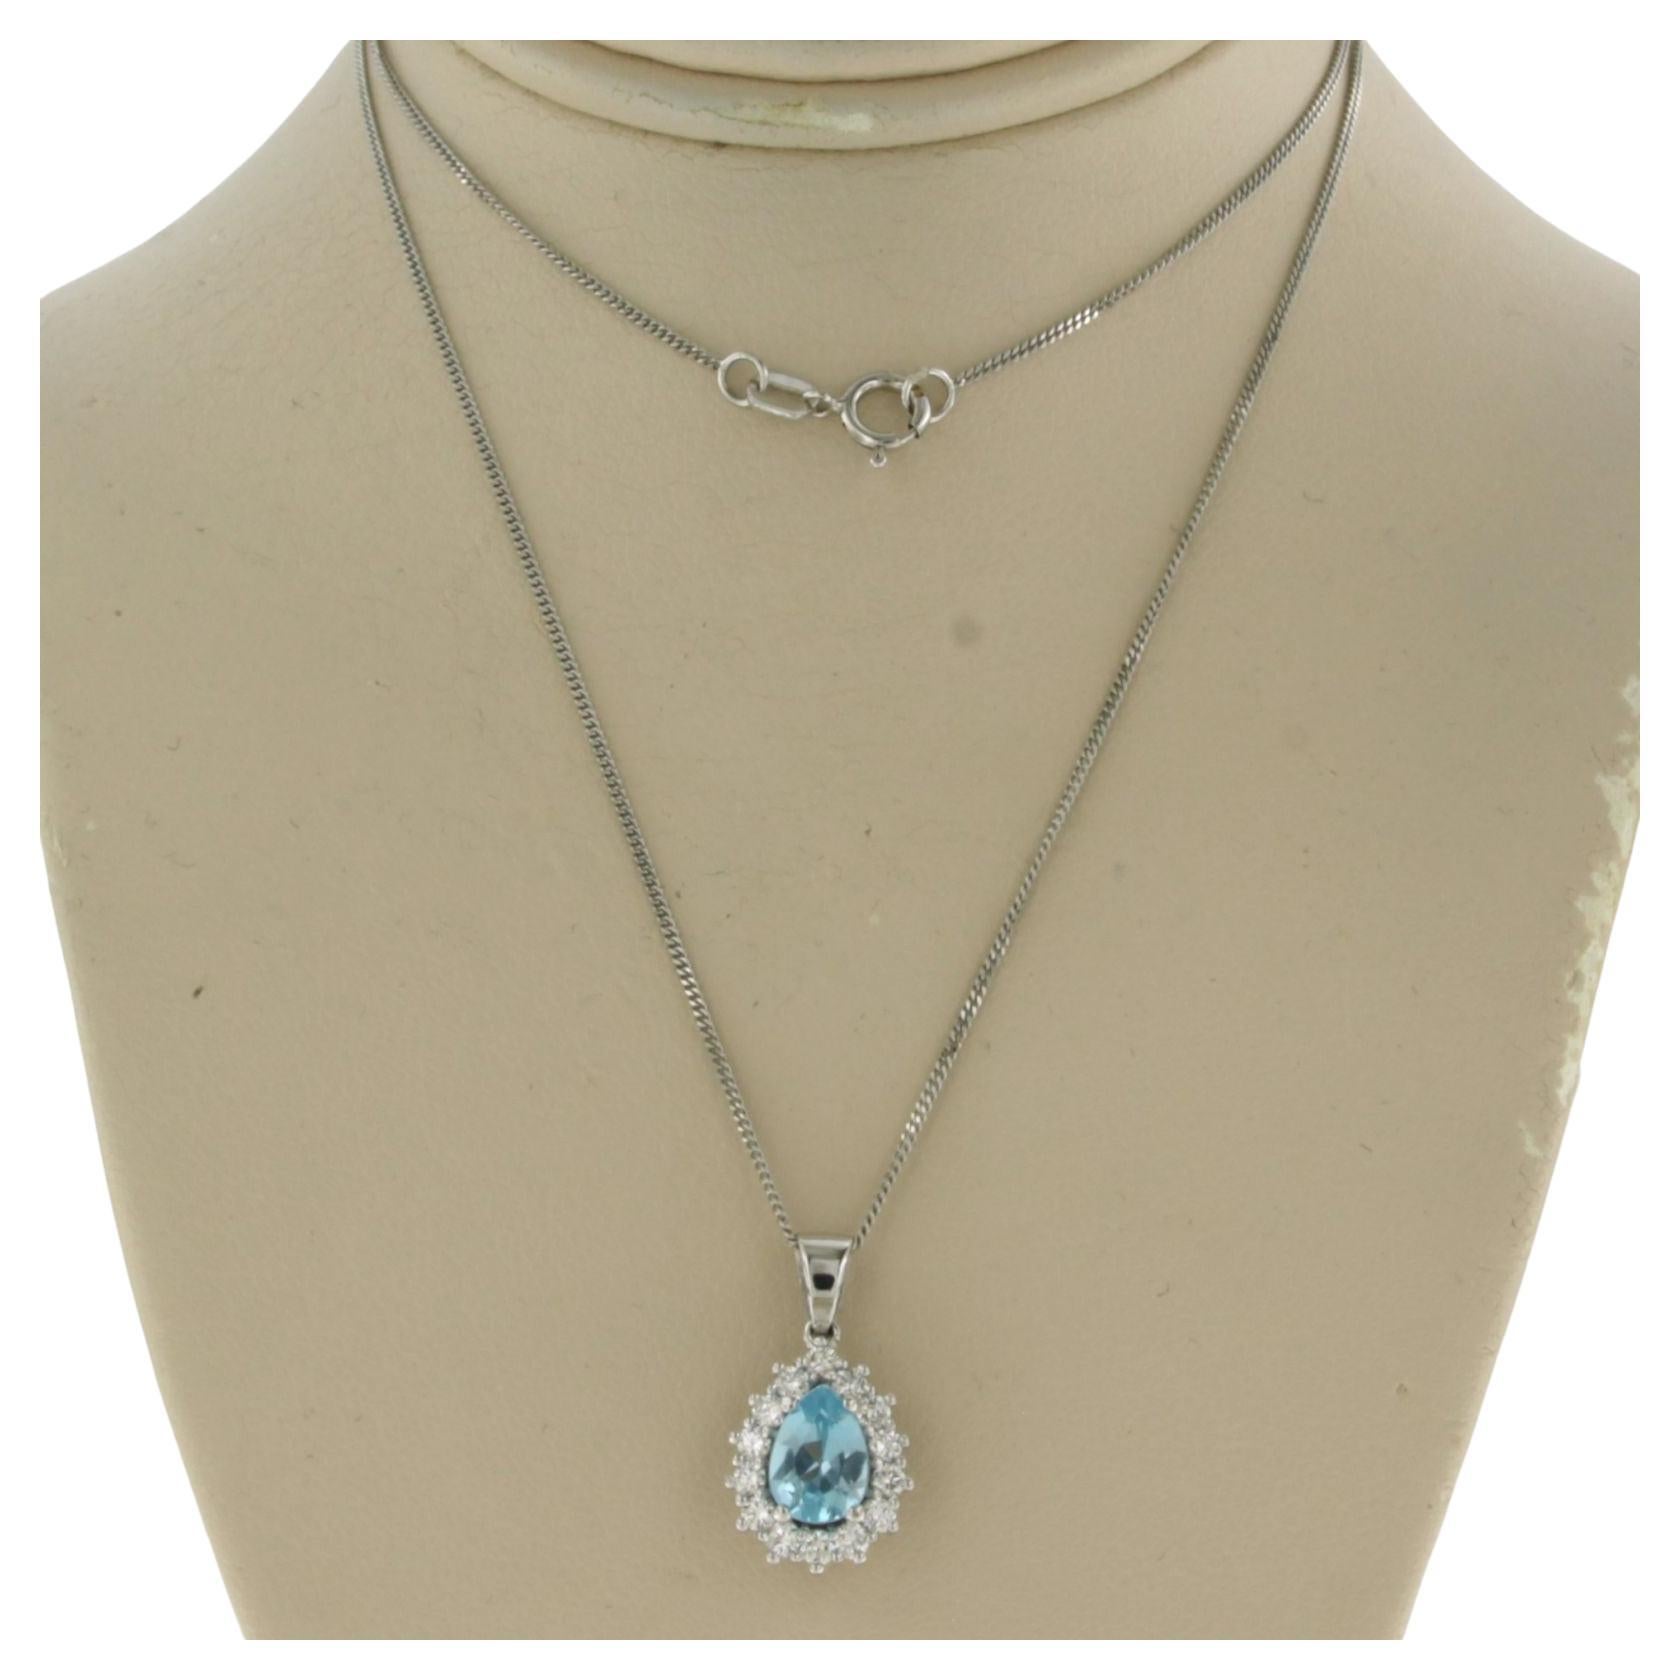 14k white gold necklace and pendant set with topaz. 0.70ct and brilliant cut diamond 0.28ct - F/G - VS/SI - 45cm long

Detailed description

the length of the necklace is 45 cm long by 0.7 mm wide

Dimensions of the pendant are 1.7 cm high by 9.7 mm